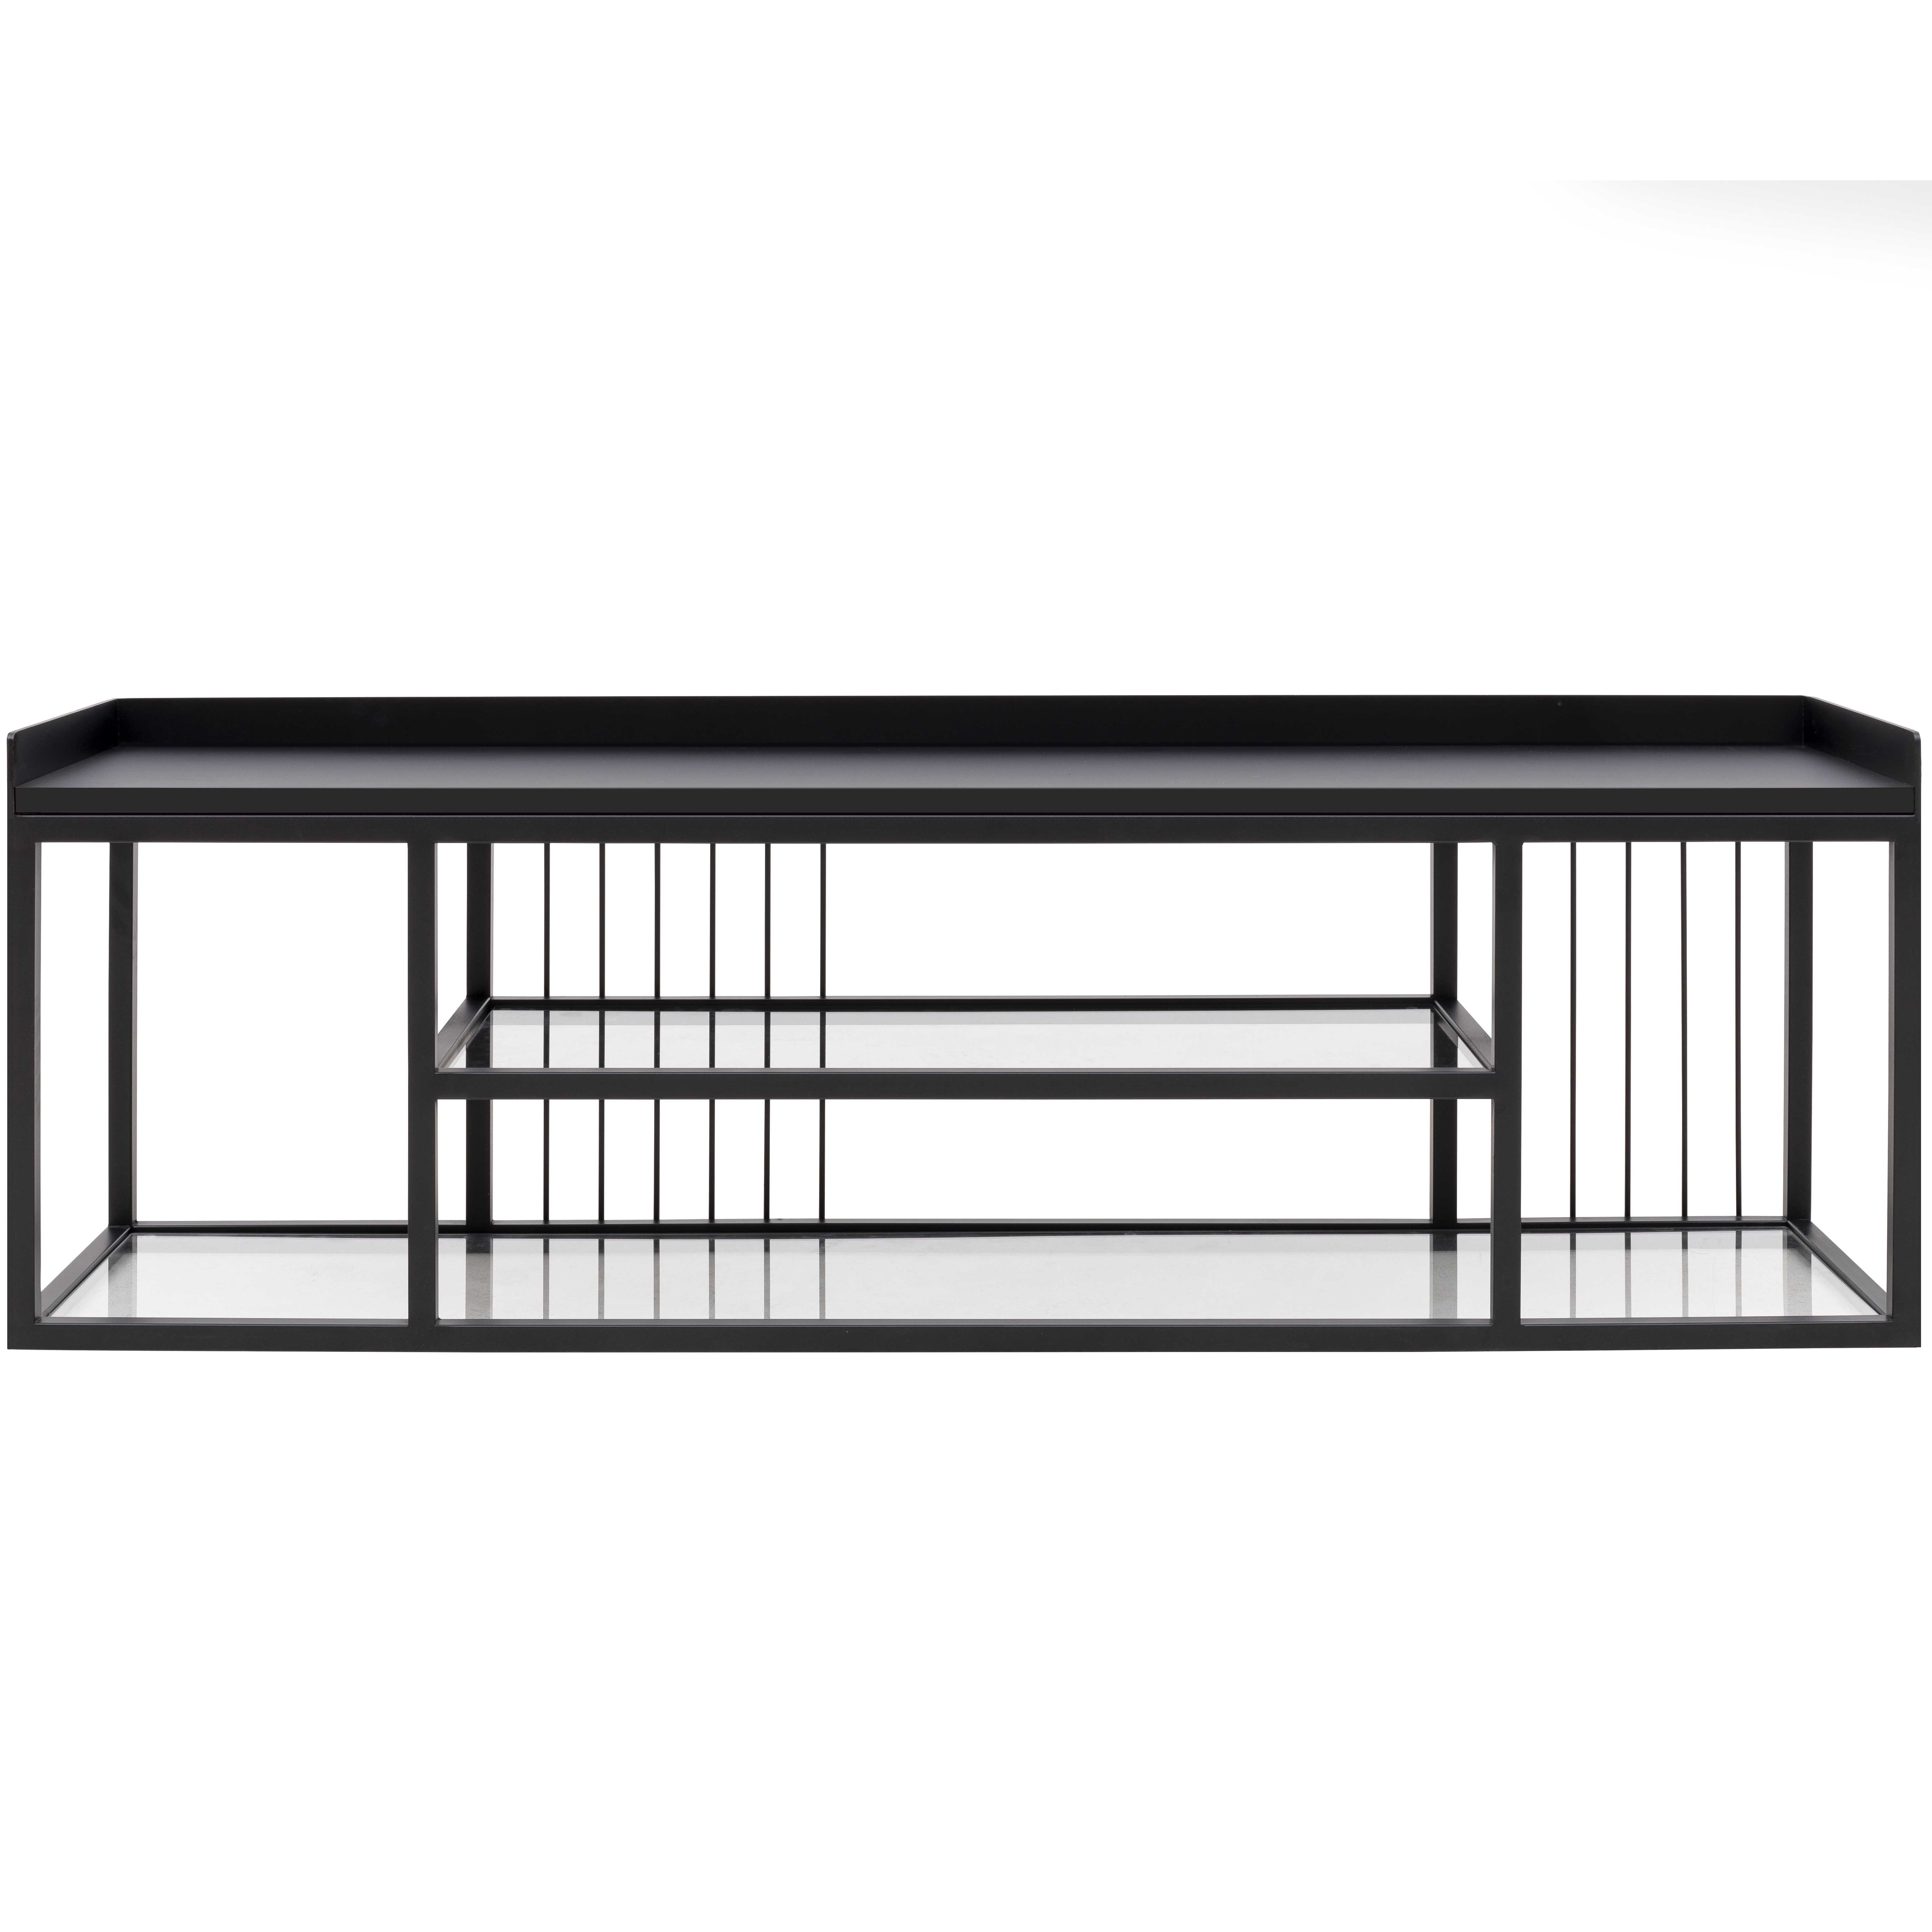 Los Angeles Vol2 Tv Stand